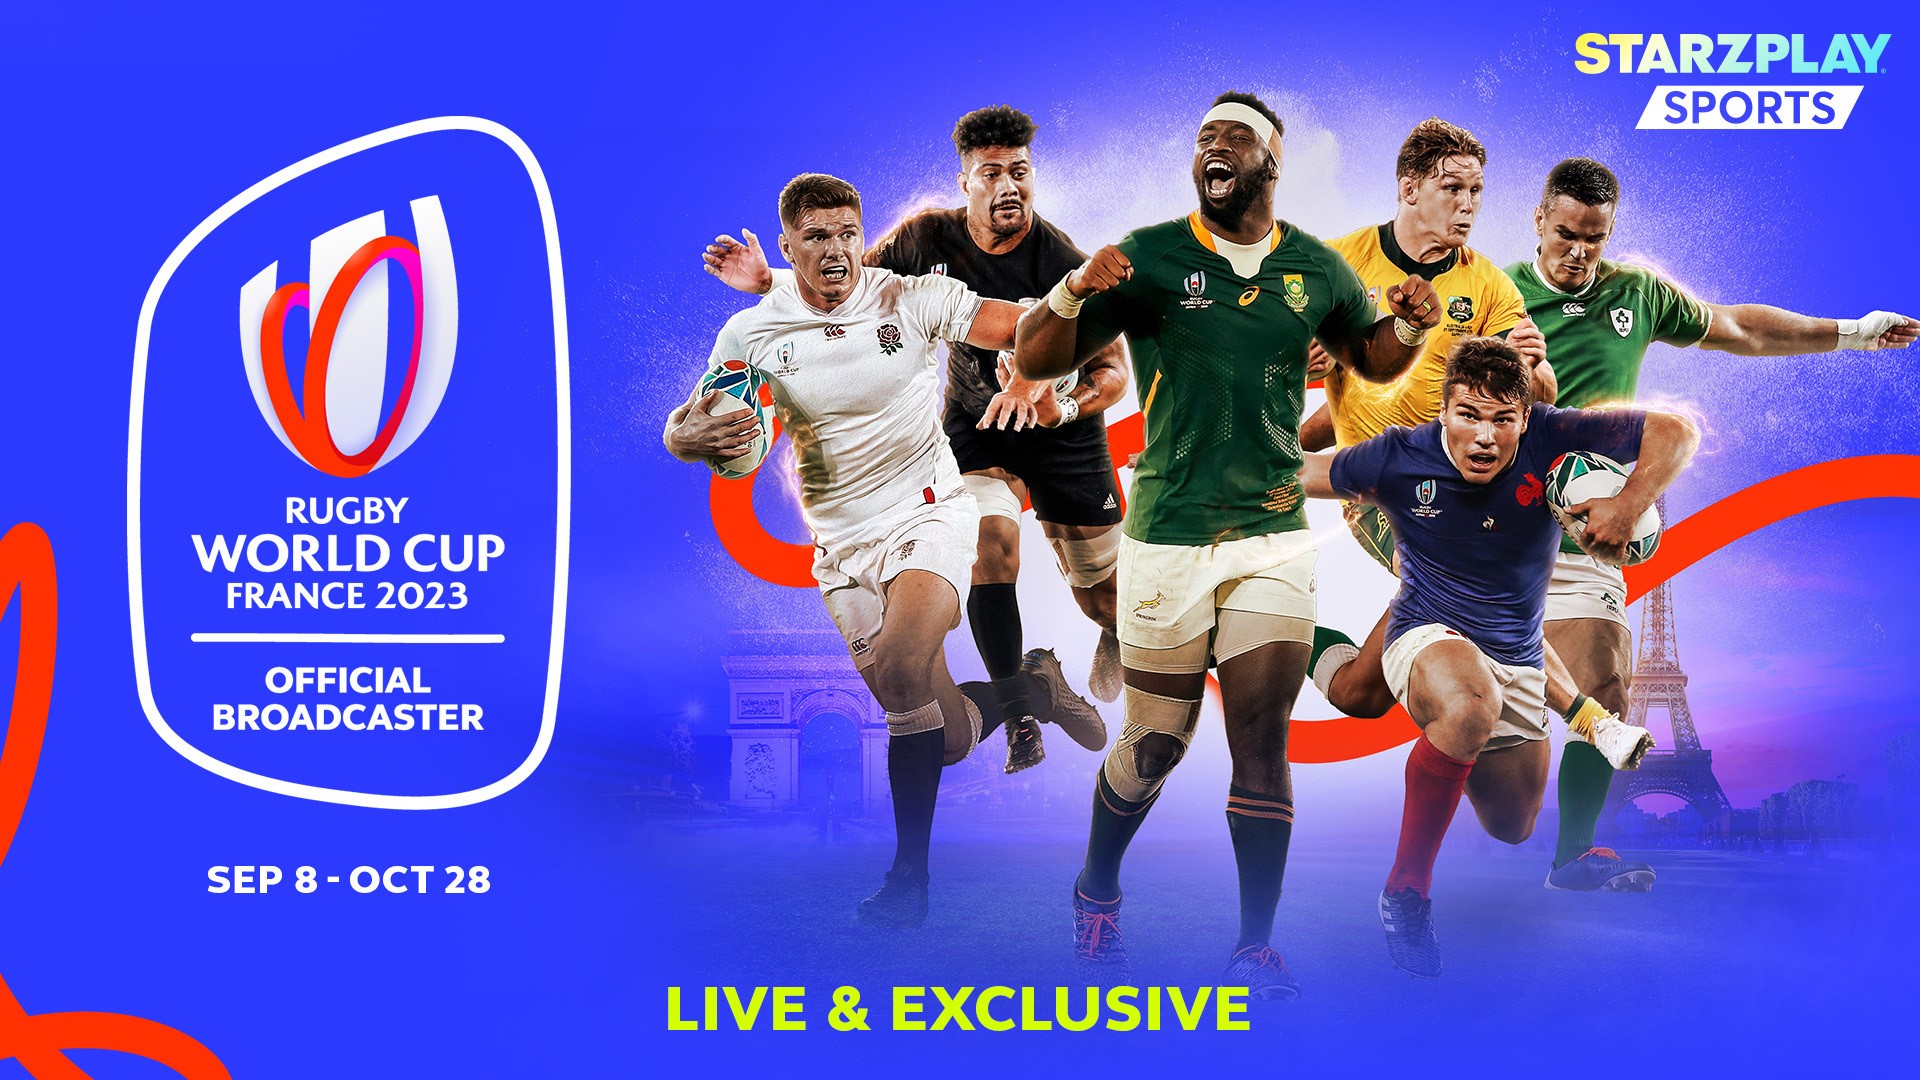 Rugby World Cup 2023 on Starzplay Advanced Television